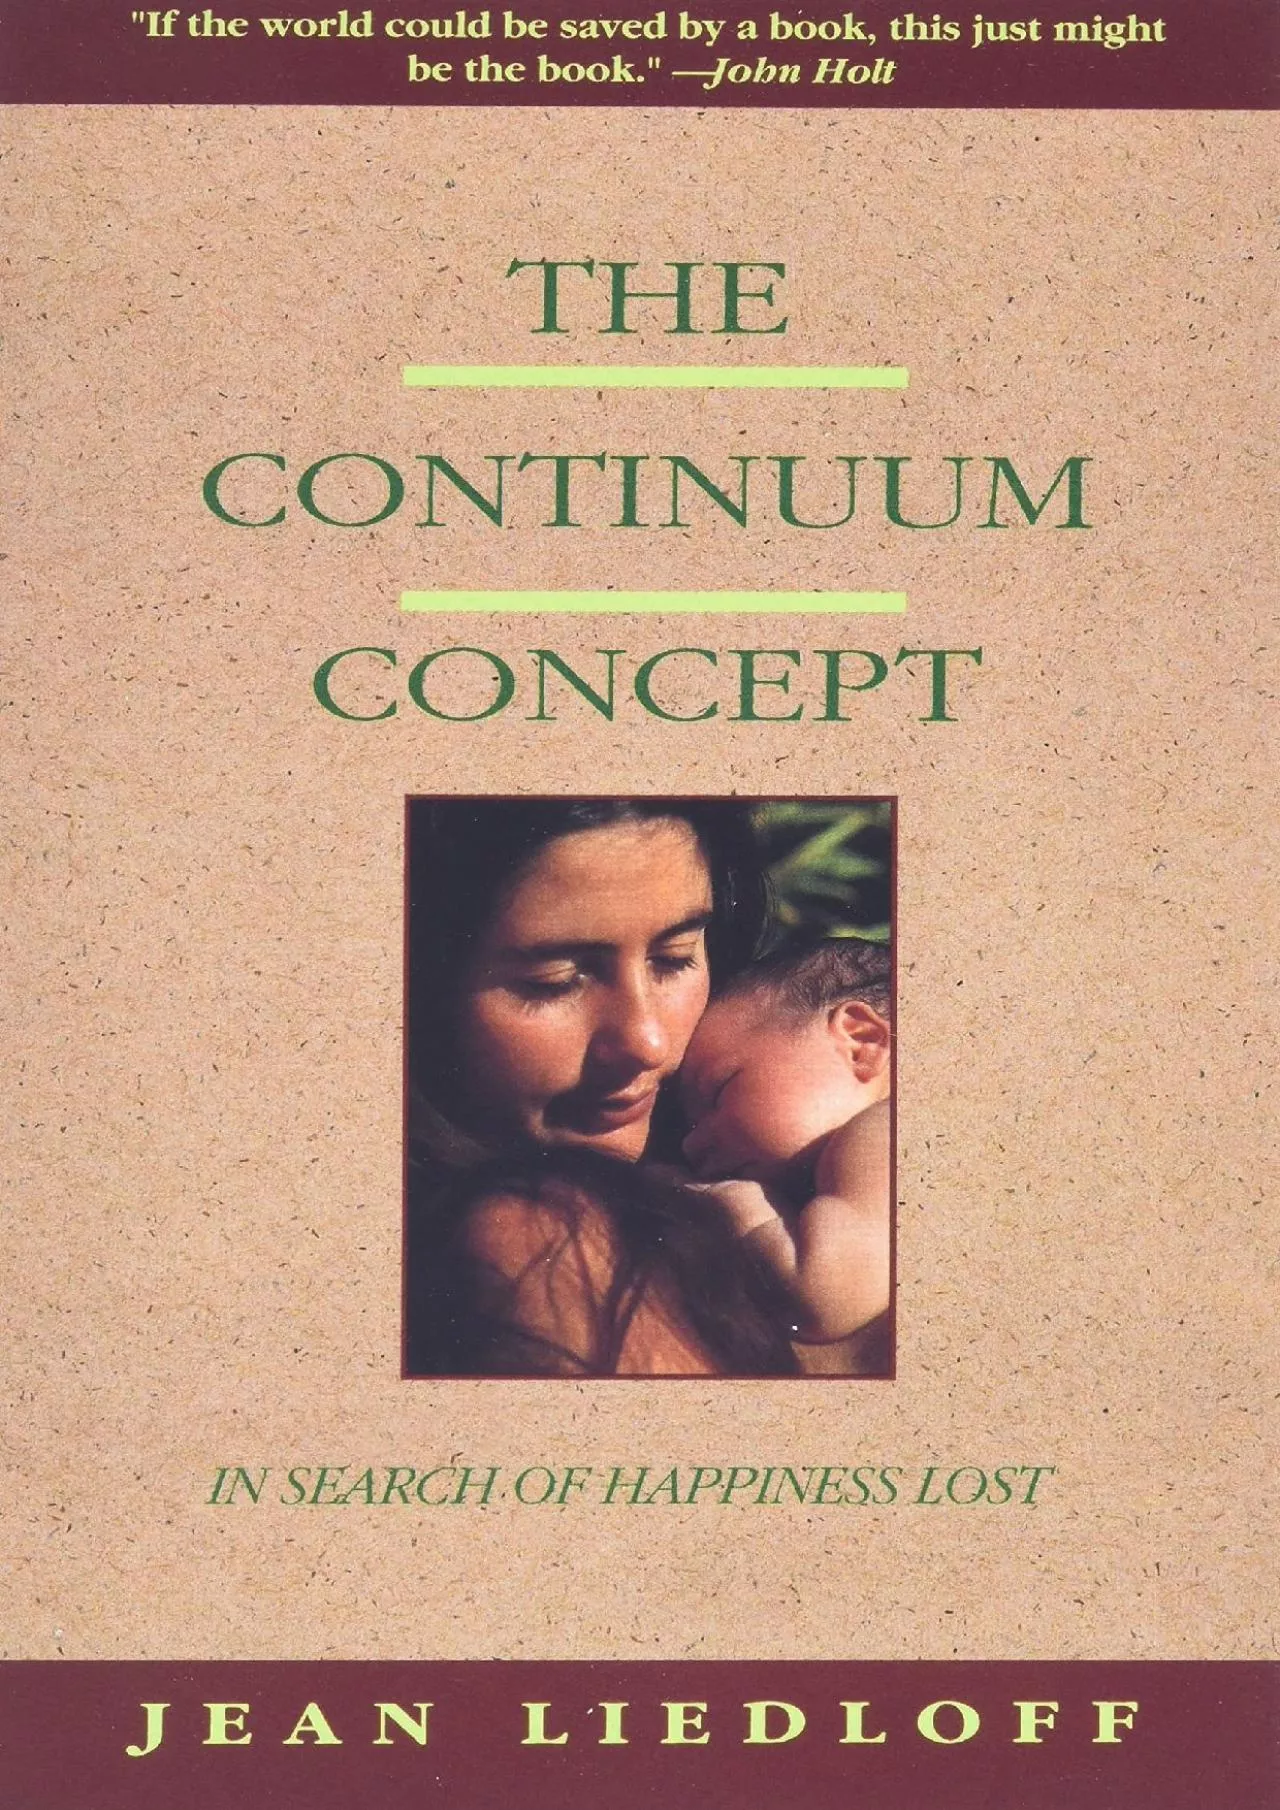 (EBOOK)-The Continuum Concept: In Search Of Happiness Lost (Classics in Human Development)